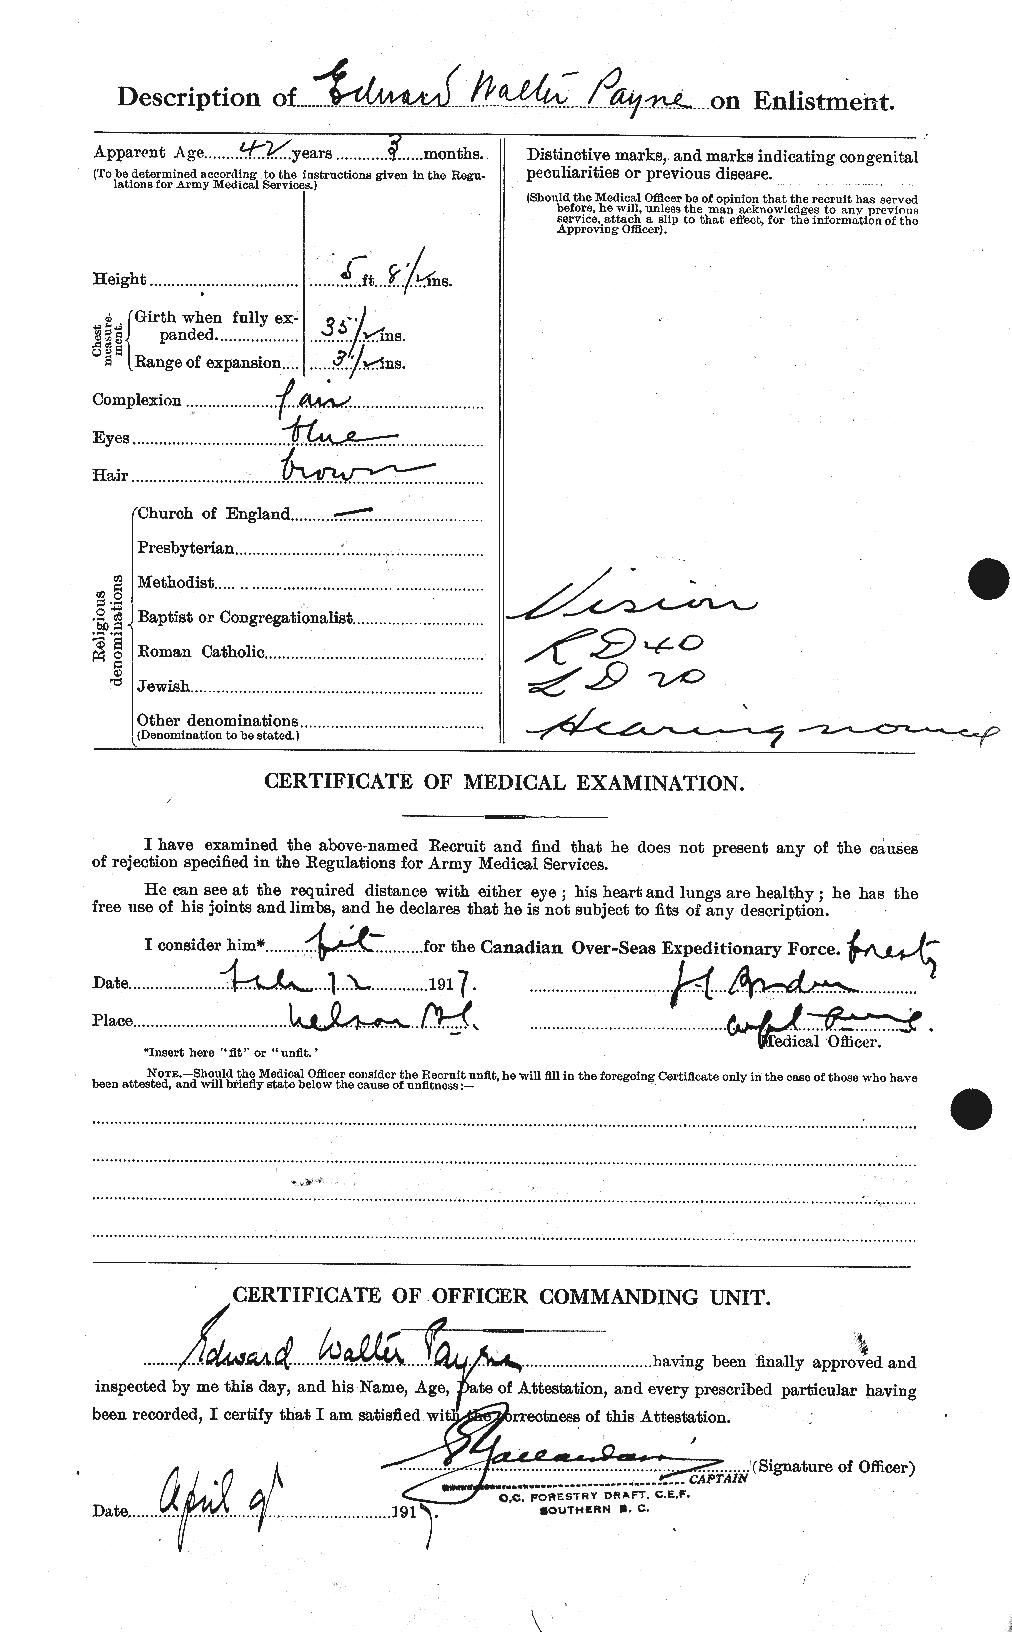 Personnel Records of the First World War - CEF 569885b